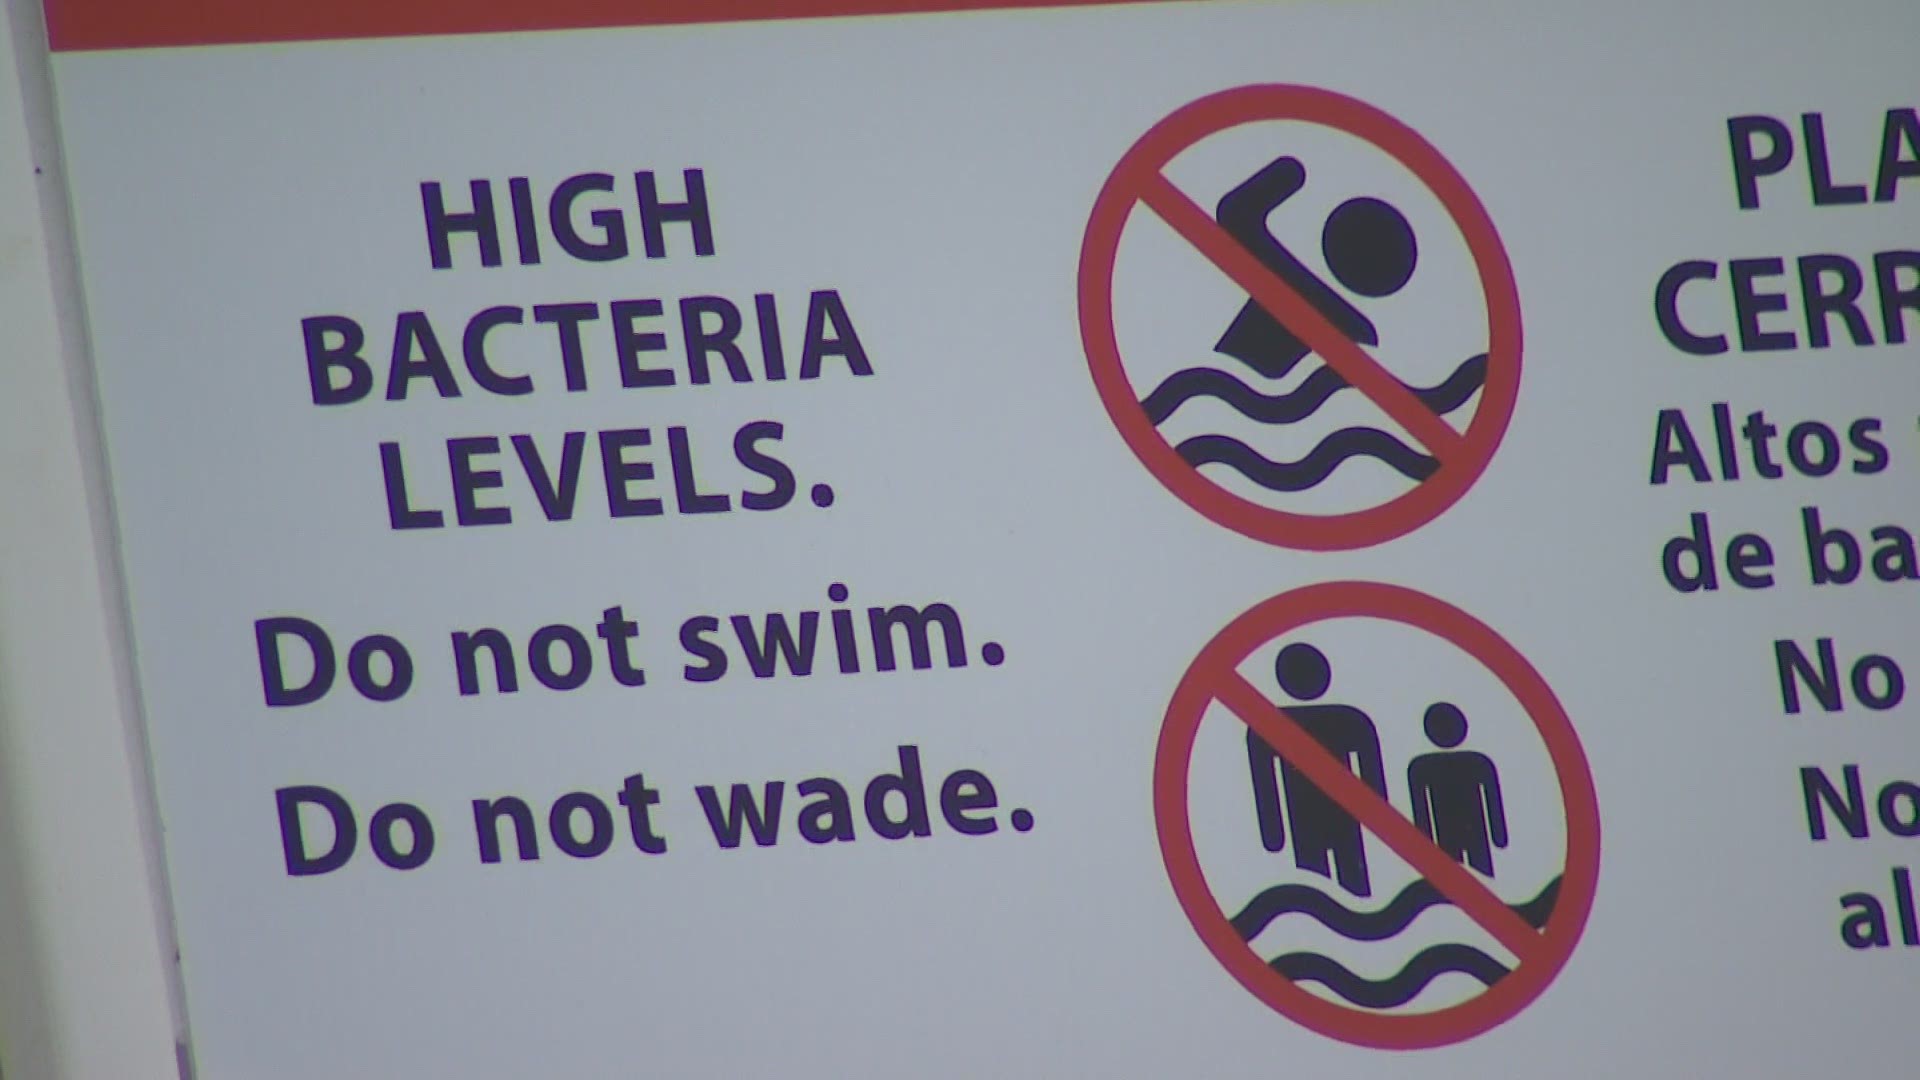 Juanita Beach Park, Newcastle Beach Park and Lake Wilderness Park are all closed due to high bacteria levels in the water. No swimming or wading allowed.